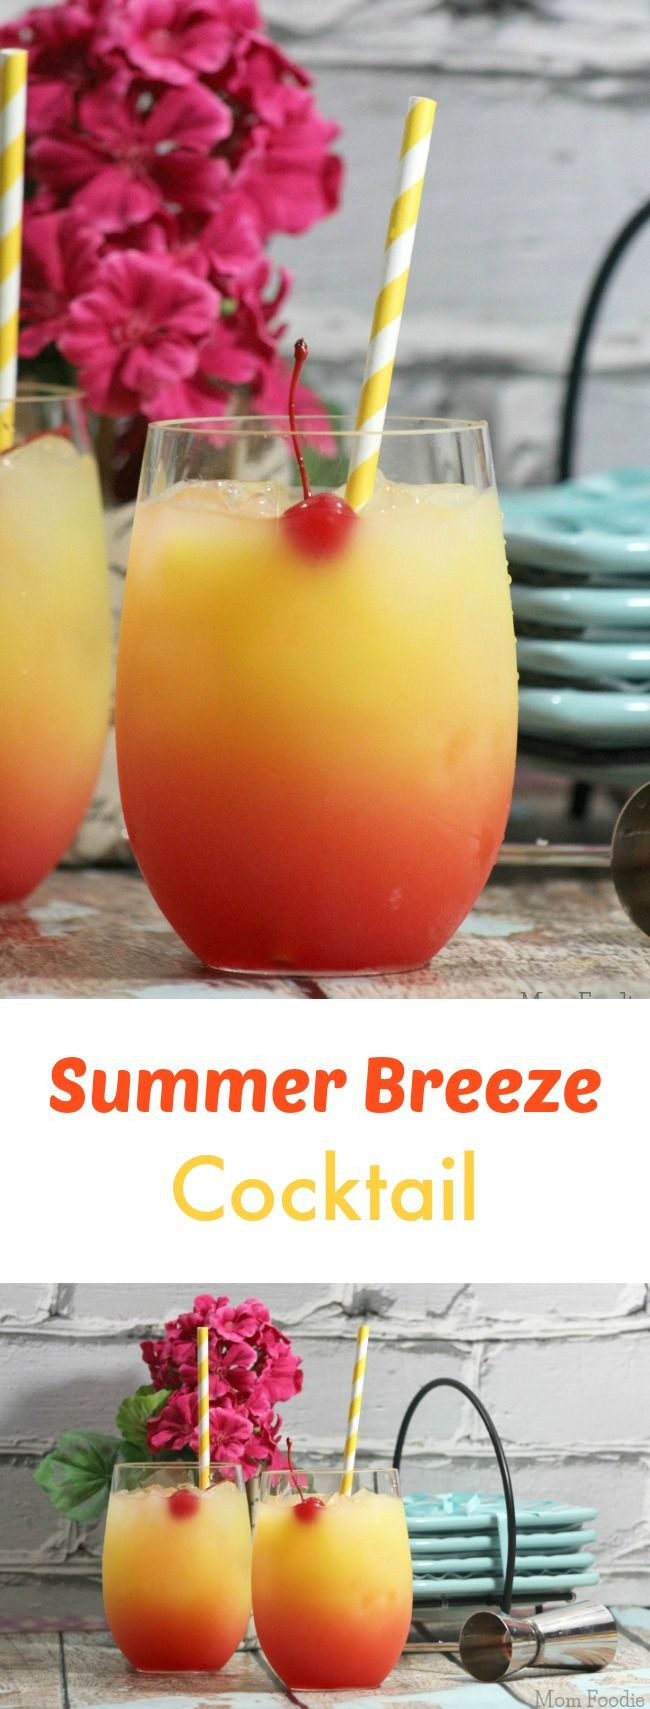 Summer Alcoholic Punch Recipe
 Summer Breeze Cocktail Recipe great for parties